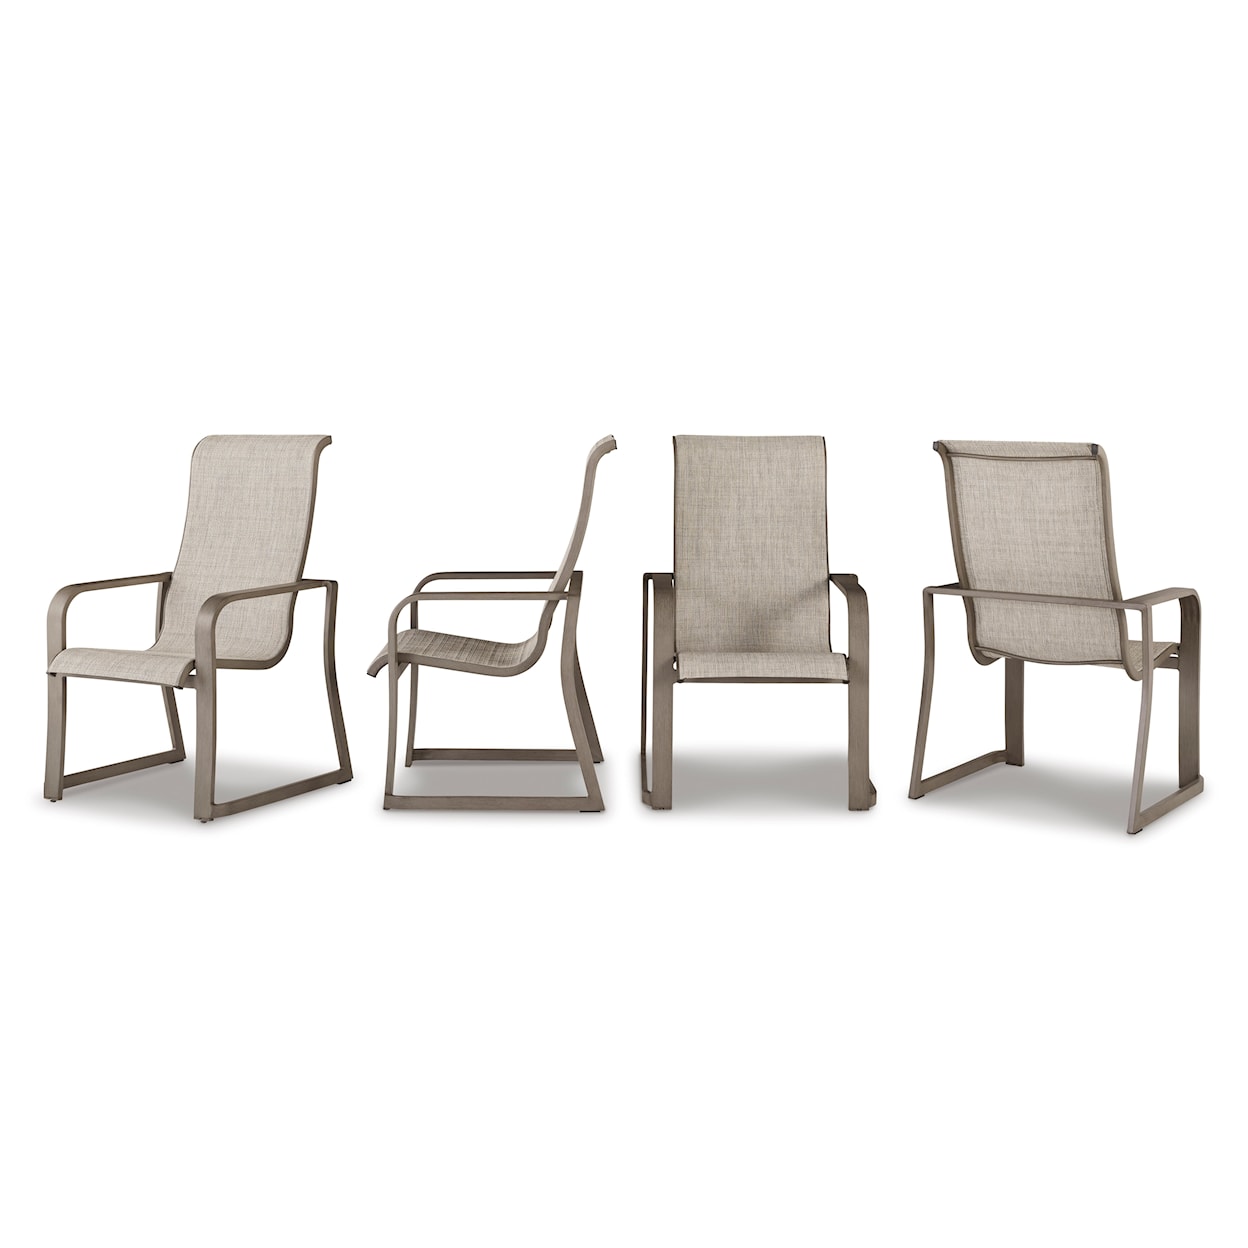 Belfort Select Bethany Outdoor Dining Sets